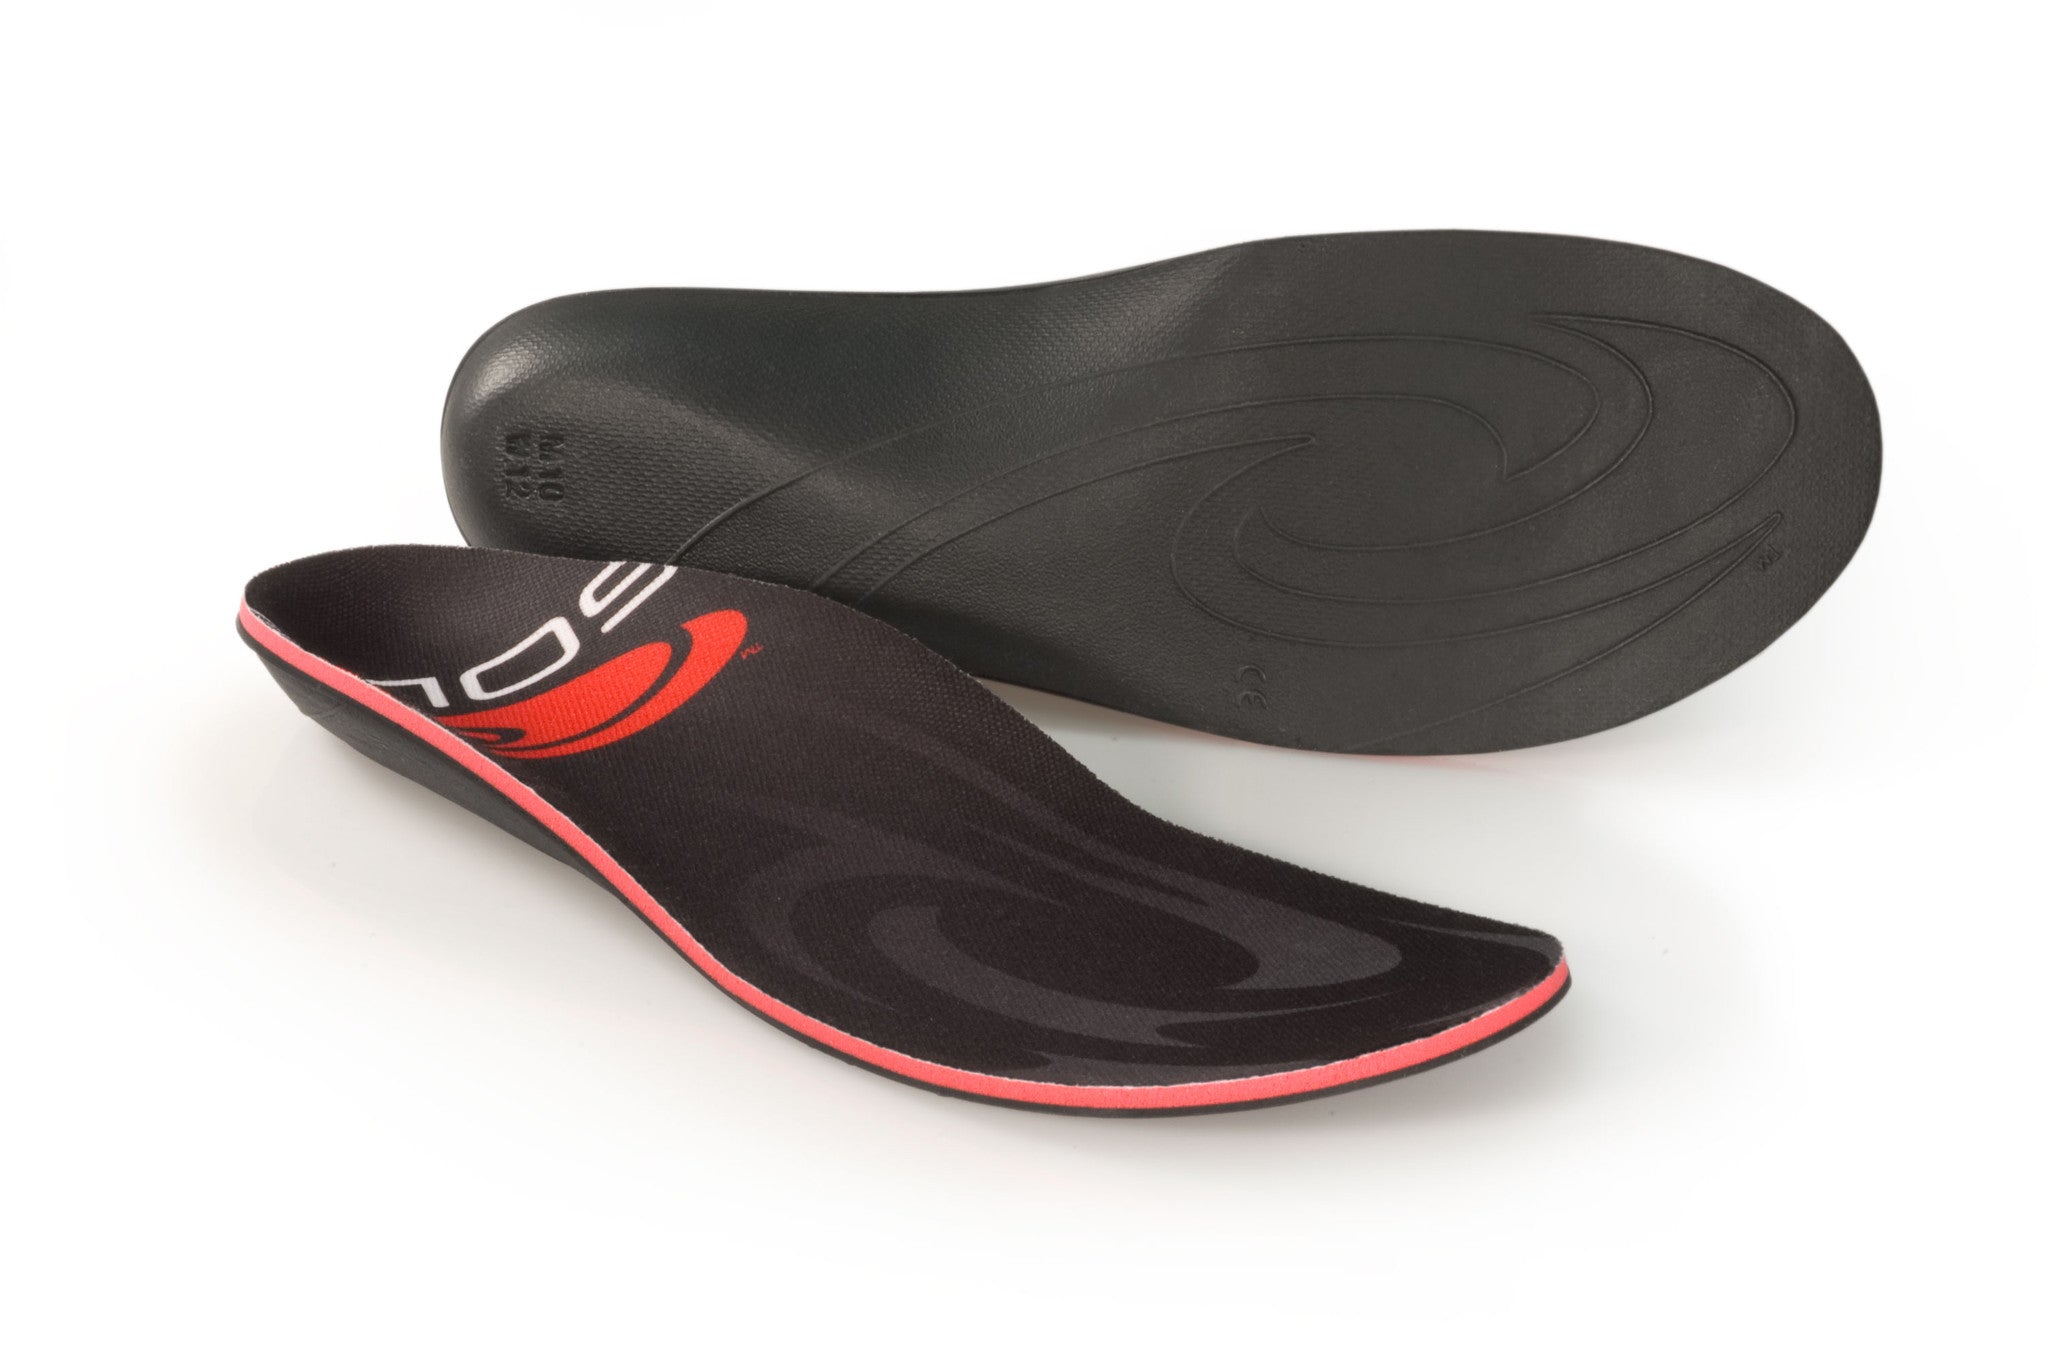 Insoles and Beyond's SOLE SOFTEC ULTRA 